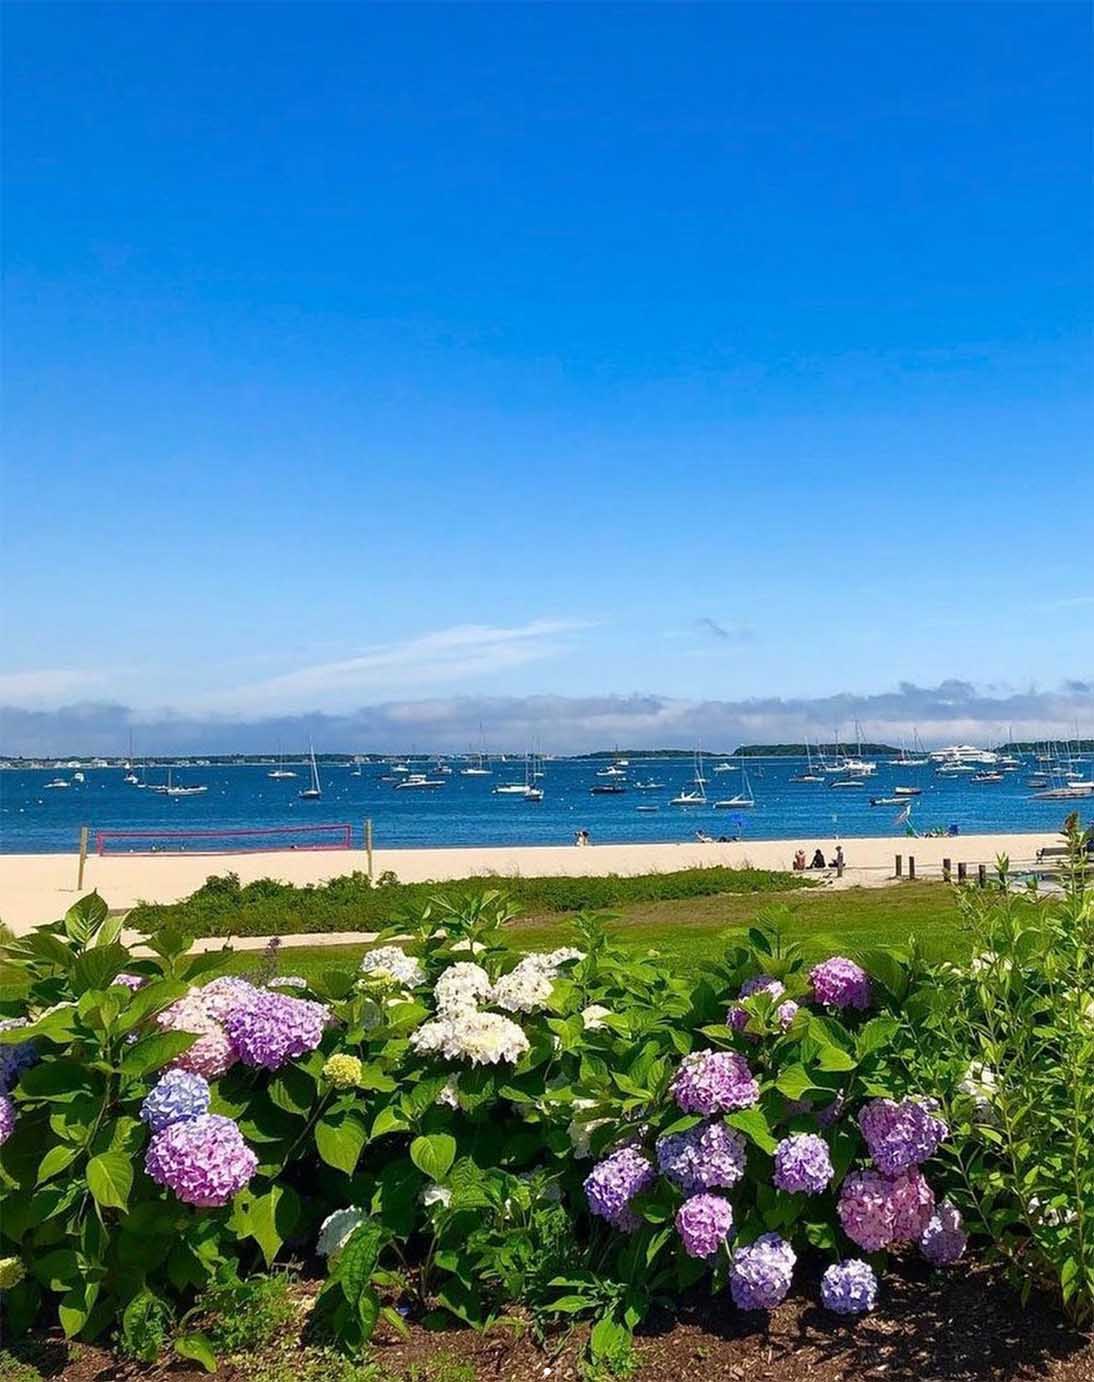 View of hydrangeas, beach, and bay filled with sailboats in Cape Cod